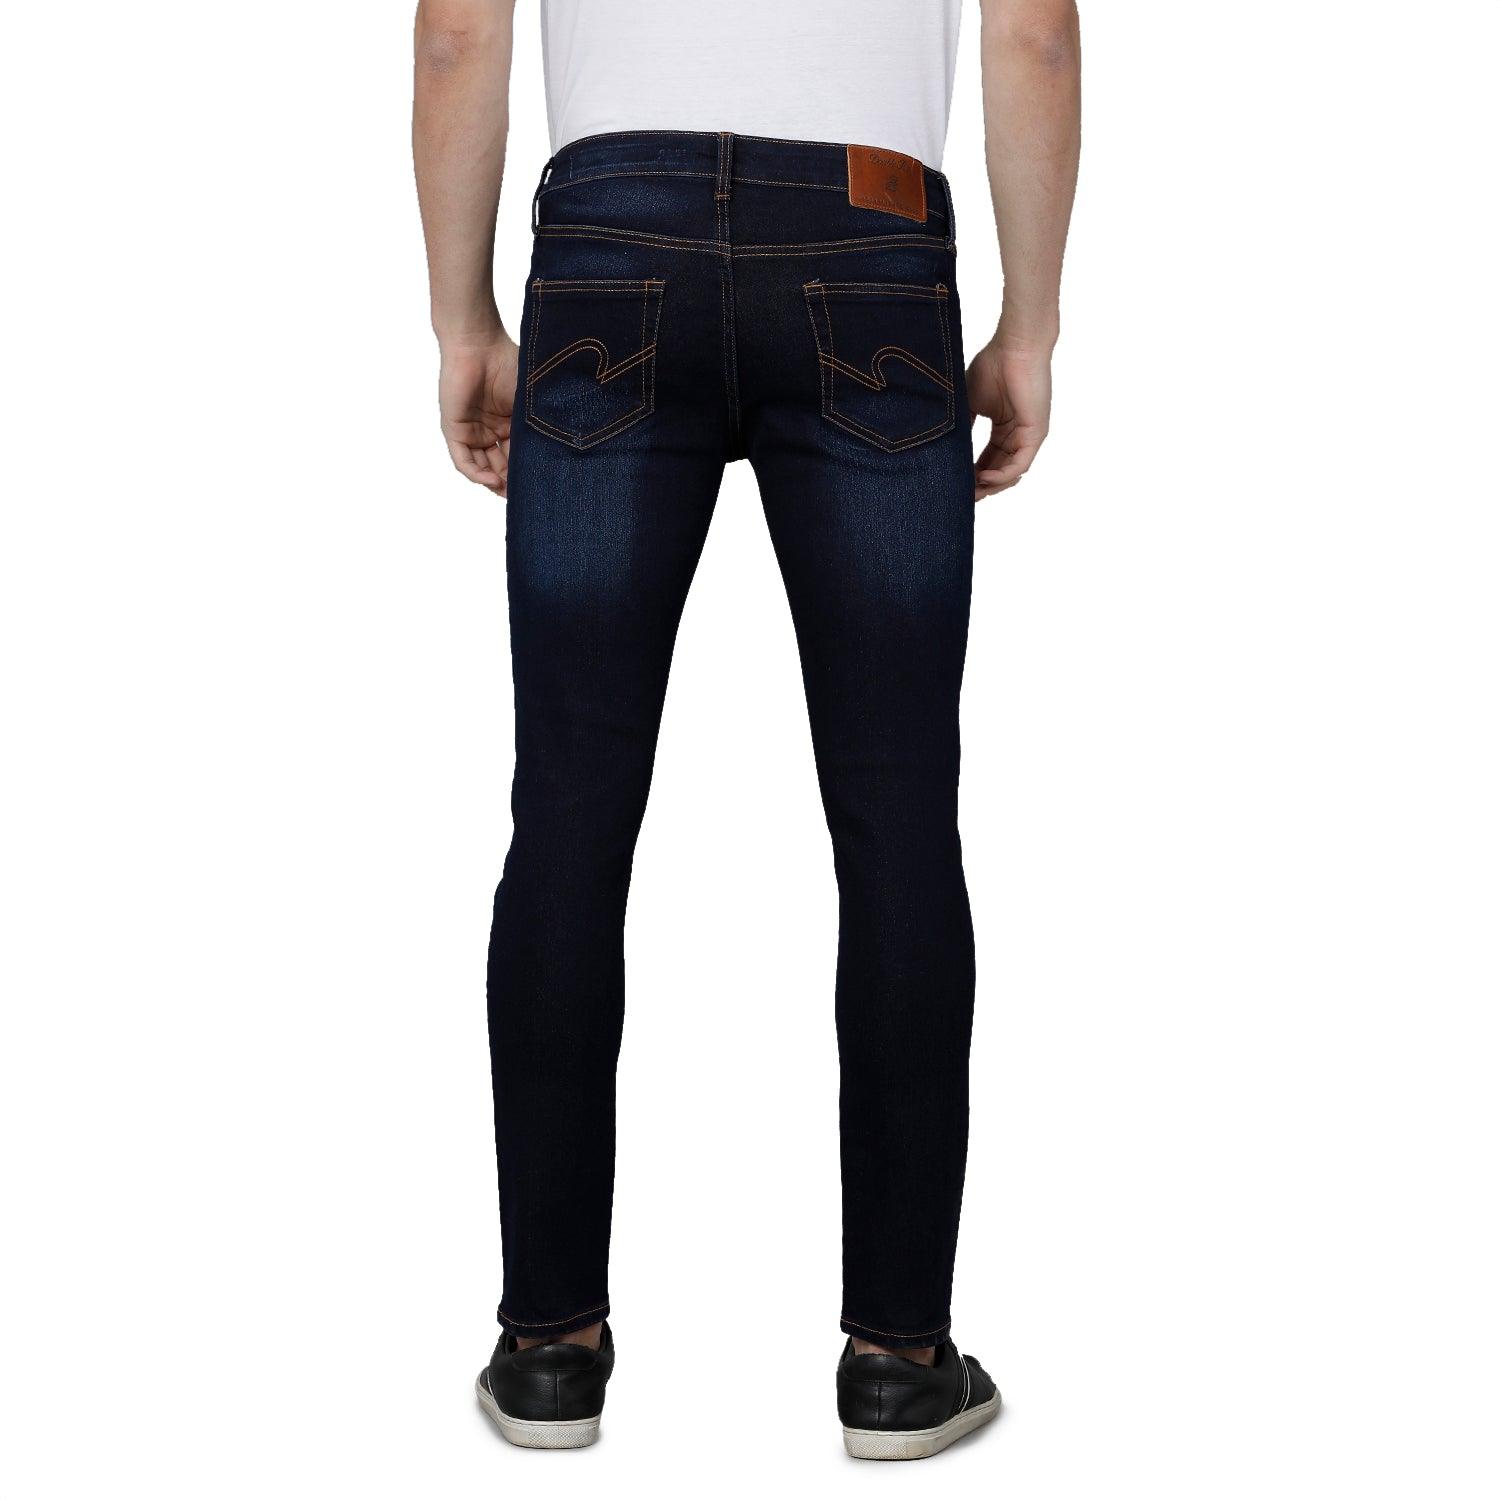 Dark Blue Solid Jeans Lean Fit - Double Two